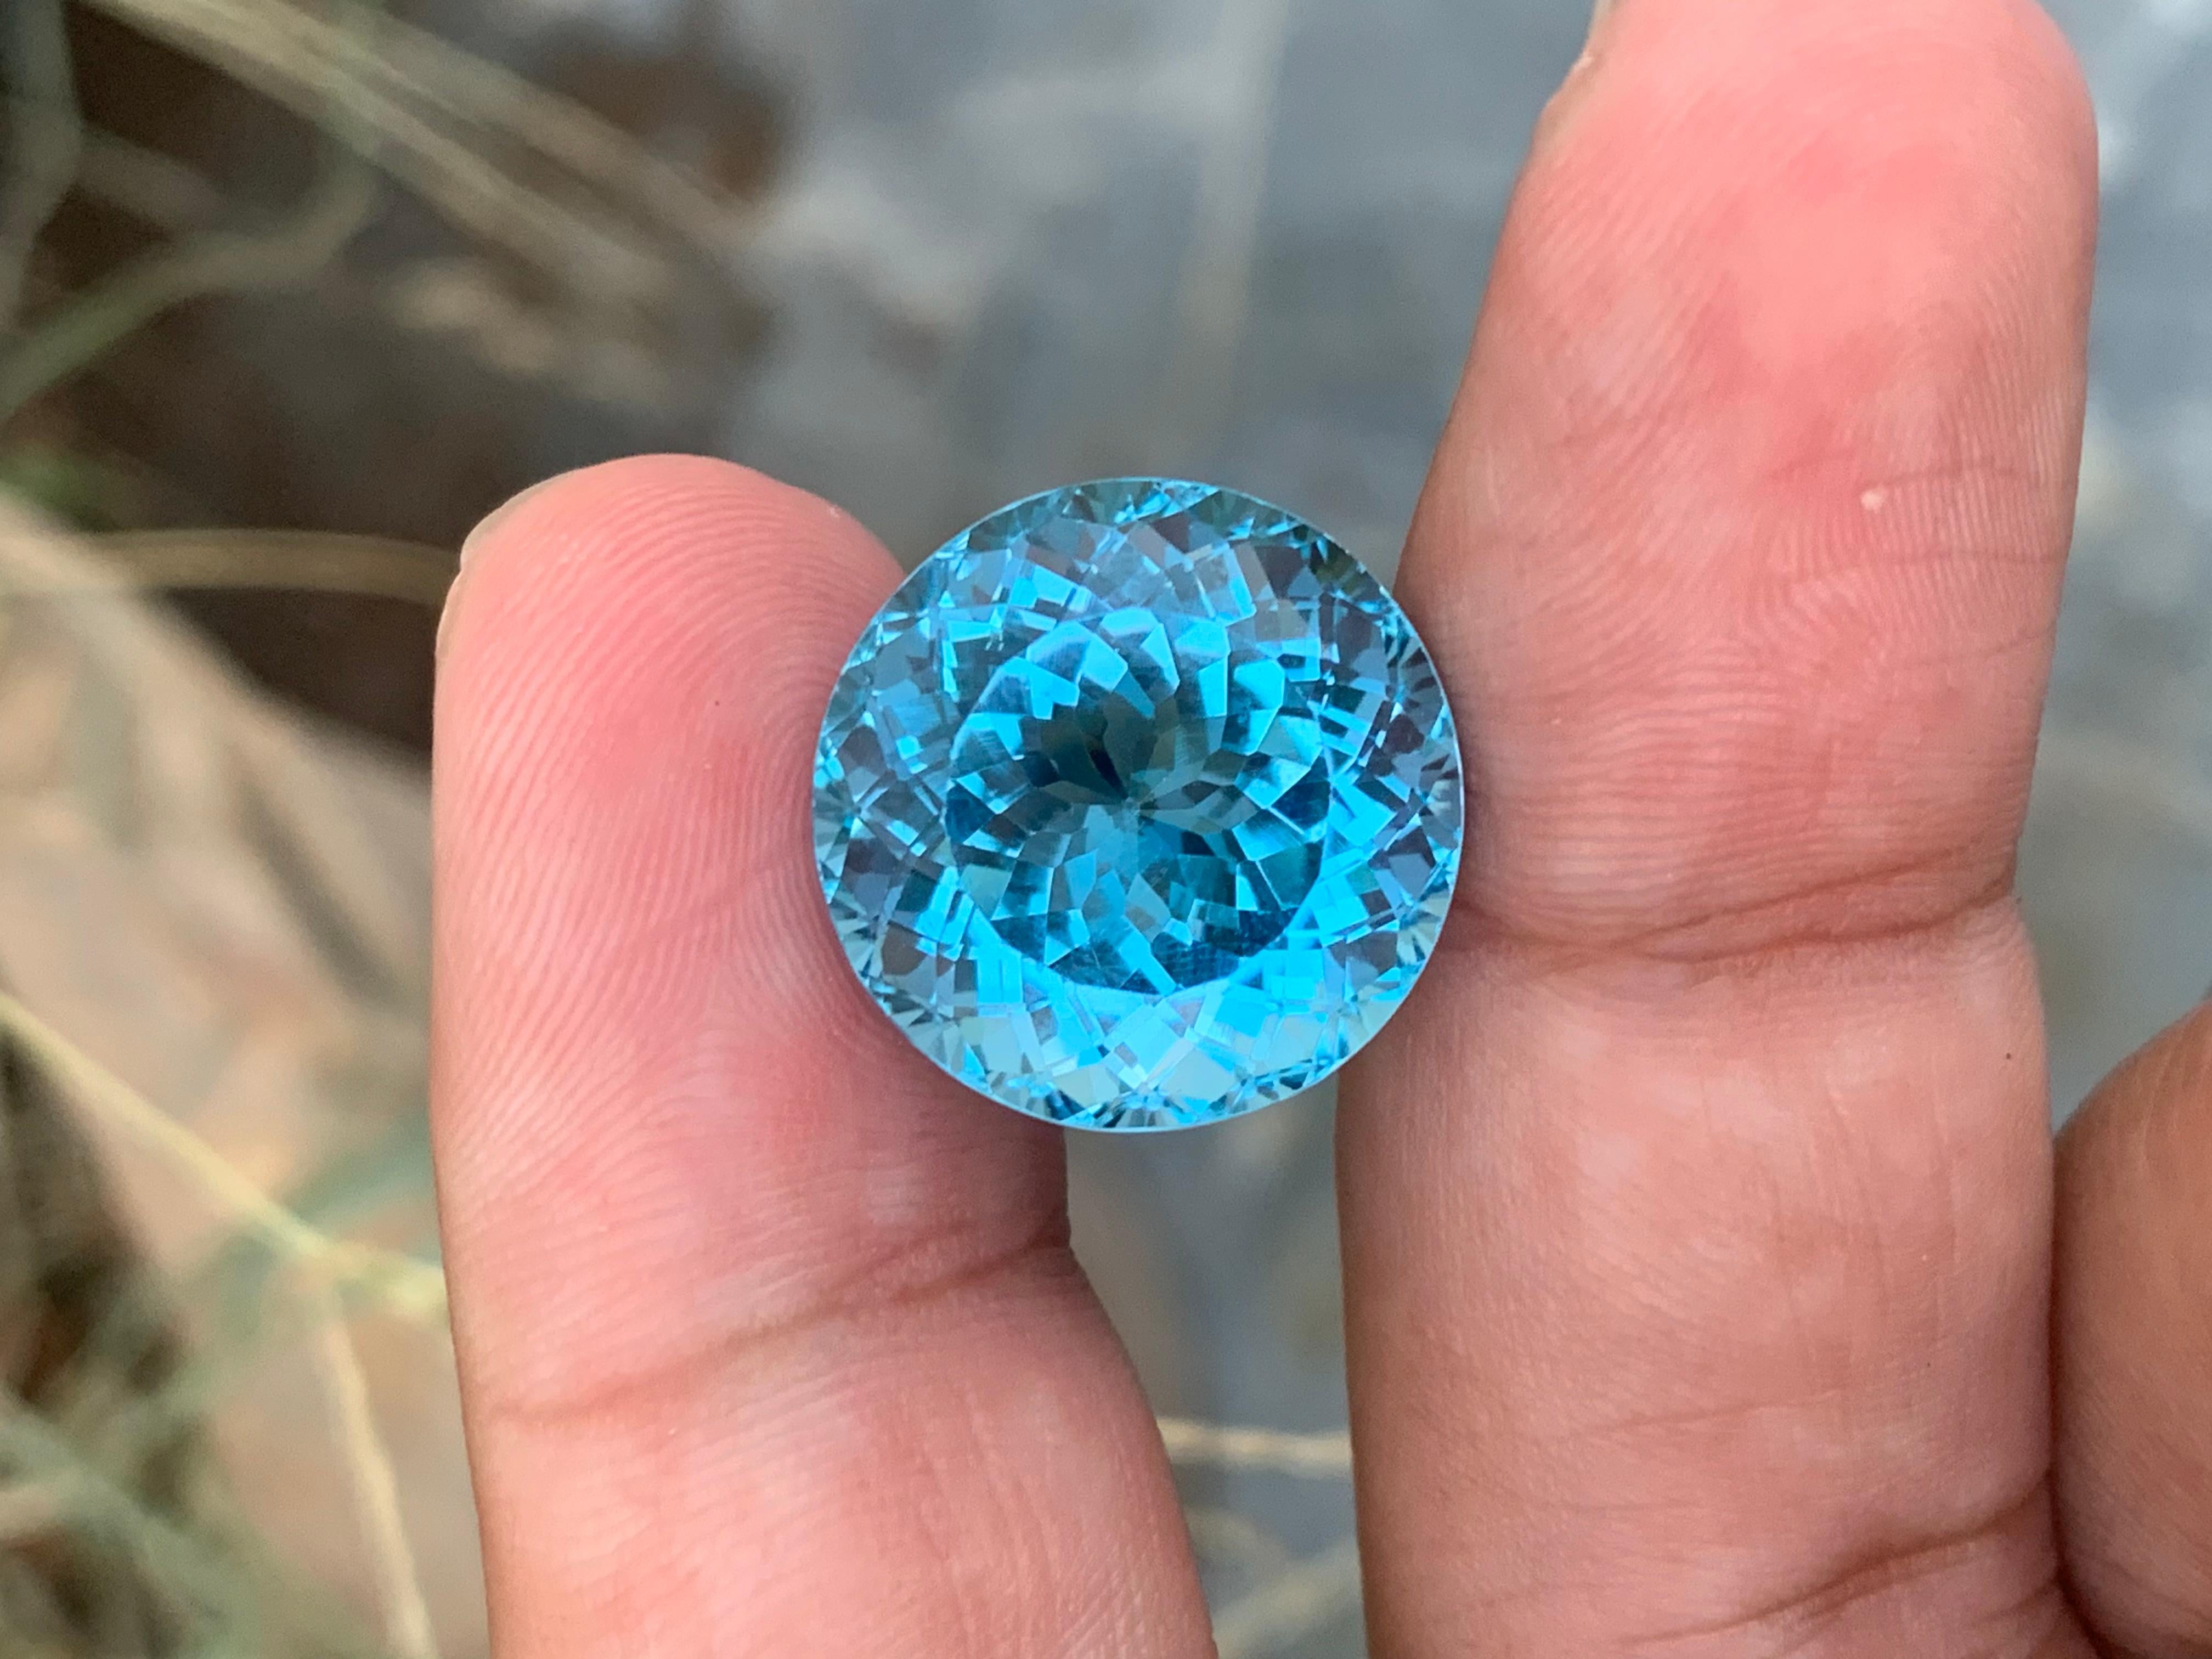 Faceted Blue Topaz 
Weight: 25.70 Carats 
Dimensions: 17.1x17.1x11.8 Mm
Origin: Brazil
Color: Blue
Shape: Round 
Certificate: On Customer Demand 
.
Blue topaz is a popular gemstone known for its beautiful blue color and is often associated with